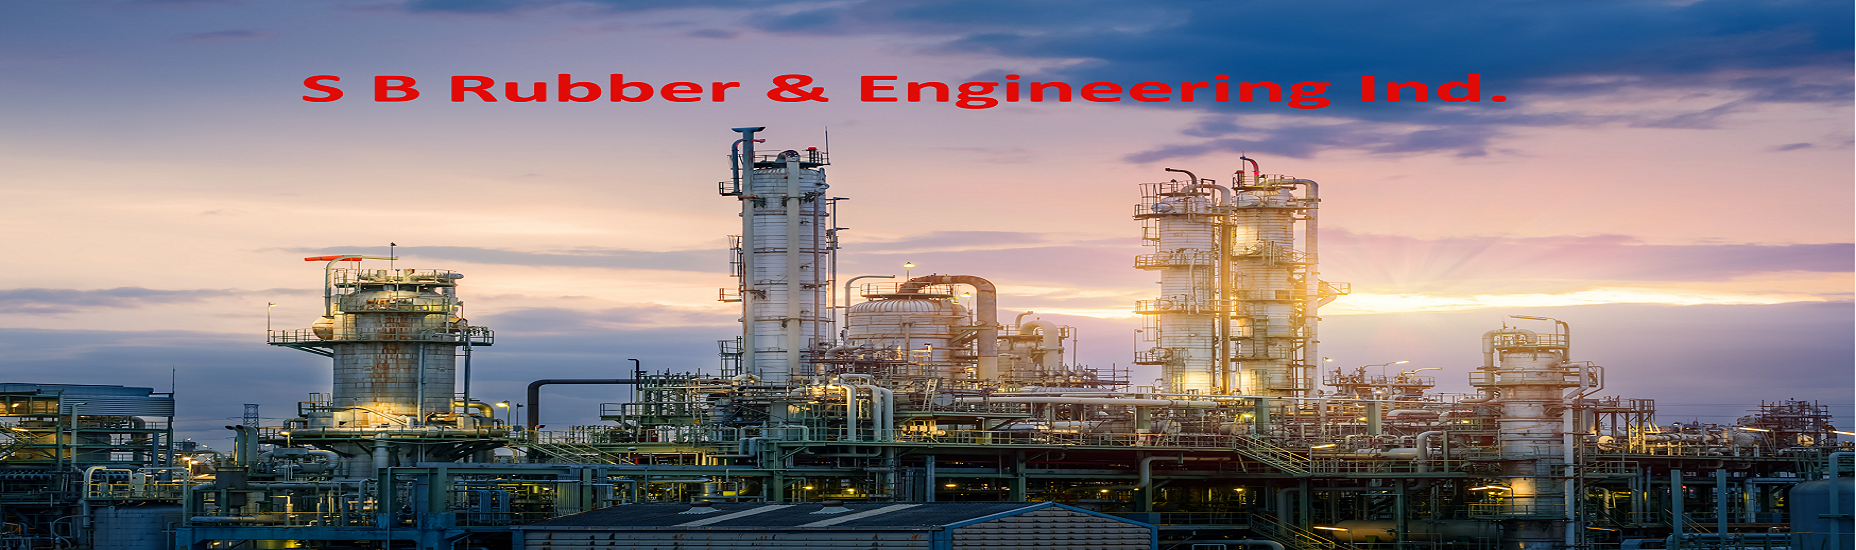  S B Rubber & Engineering Ind. 